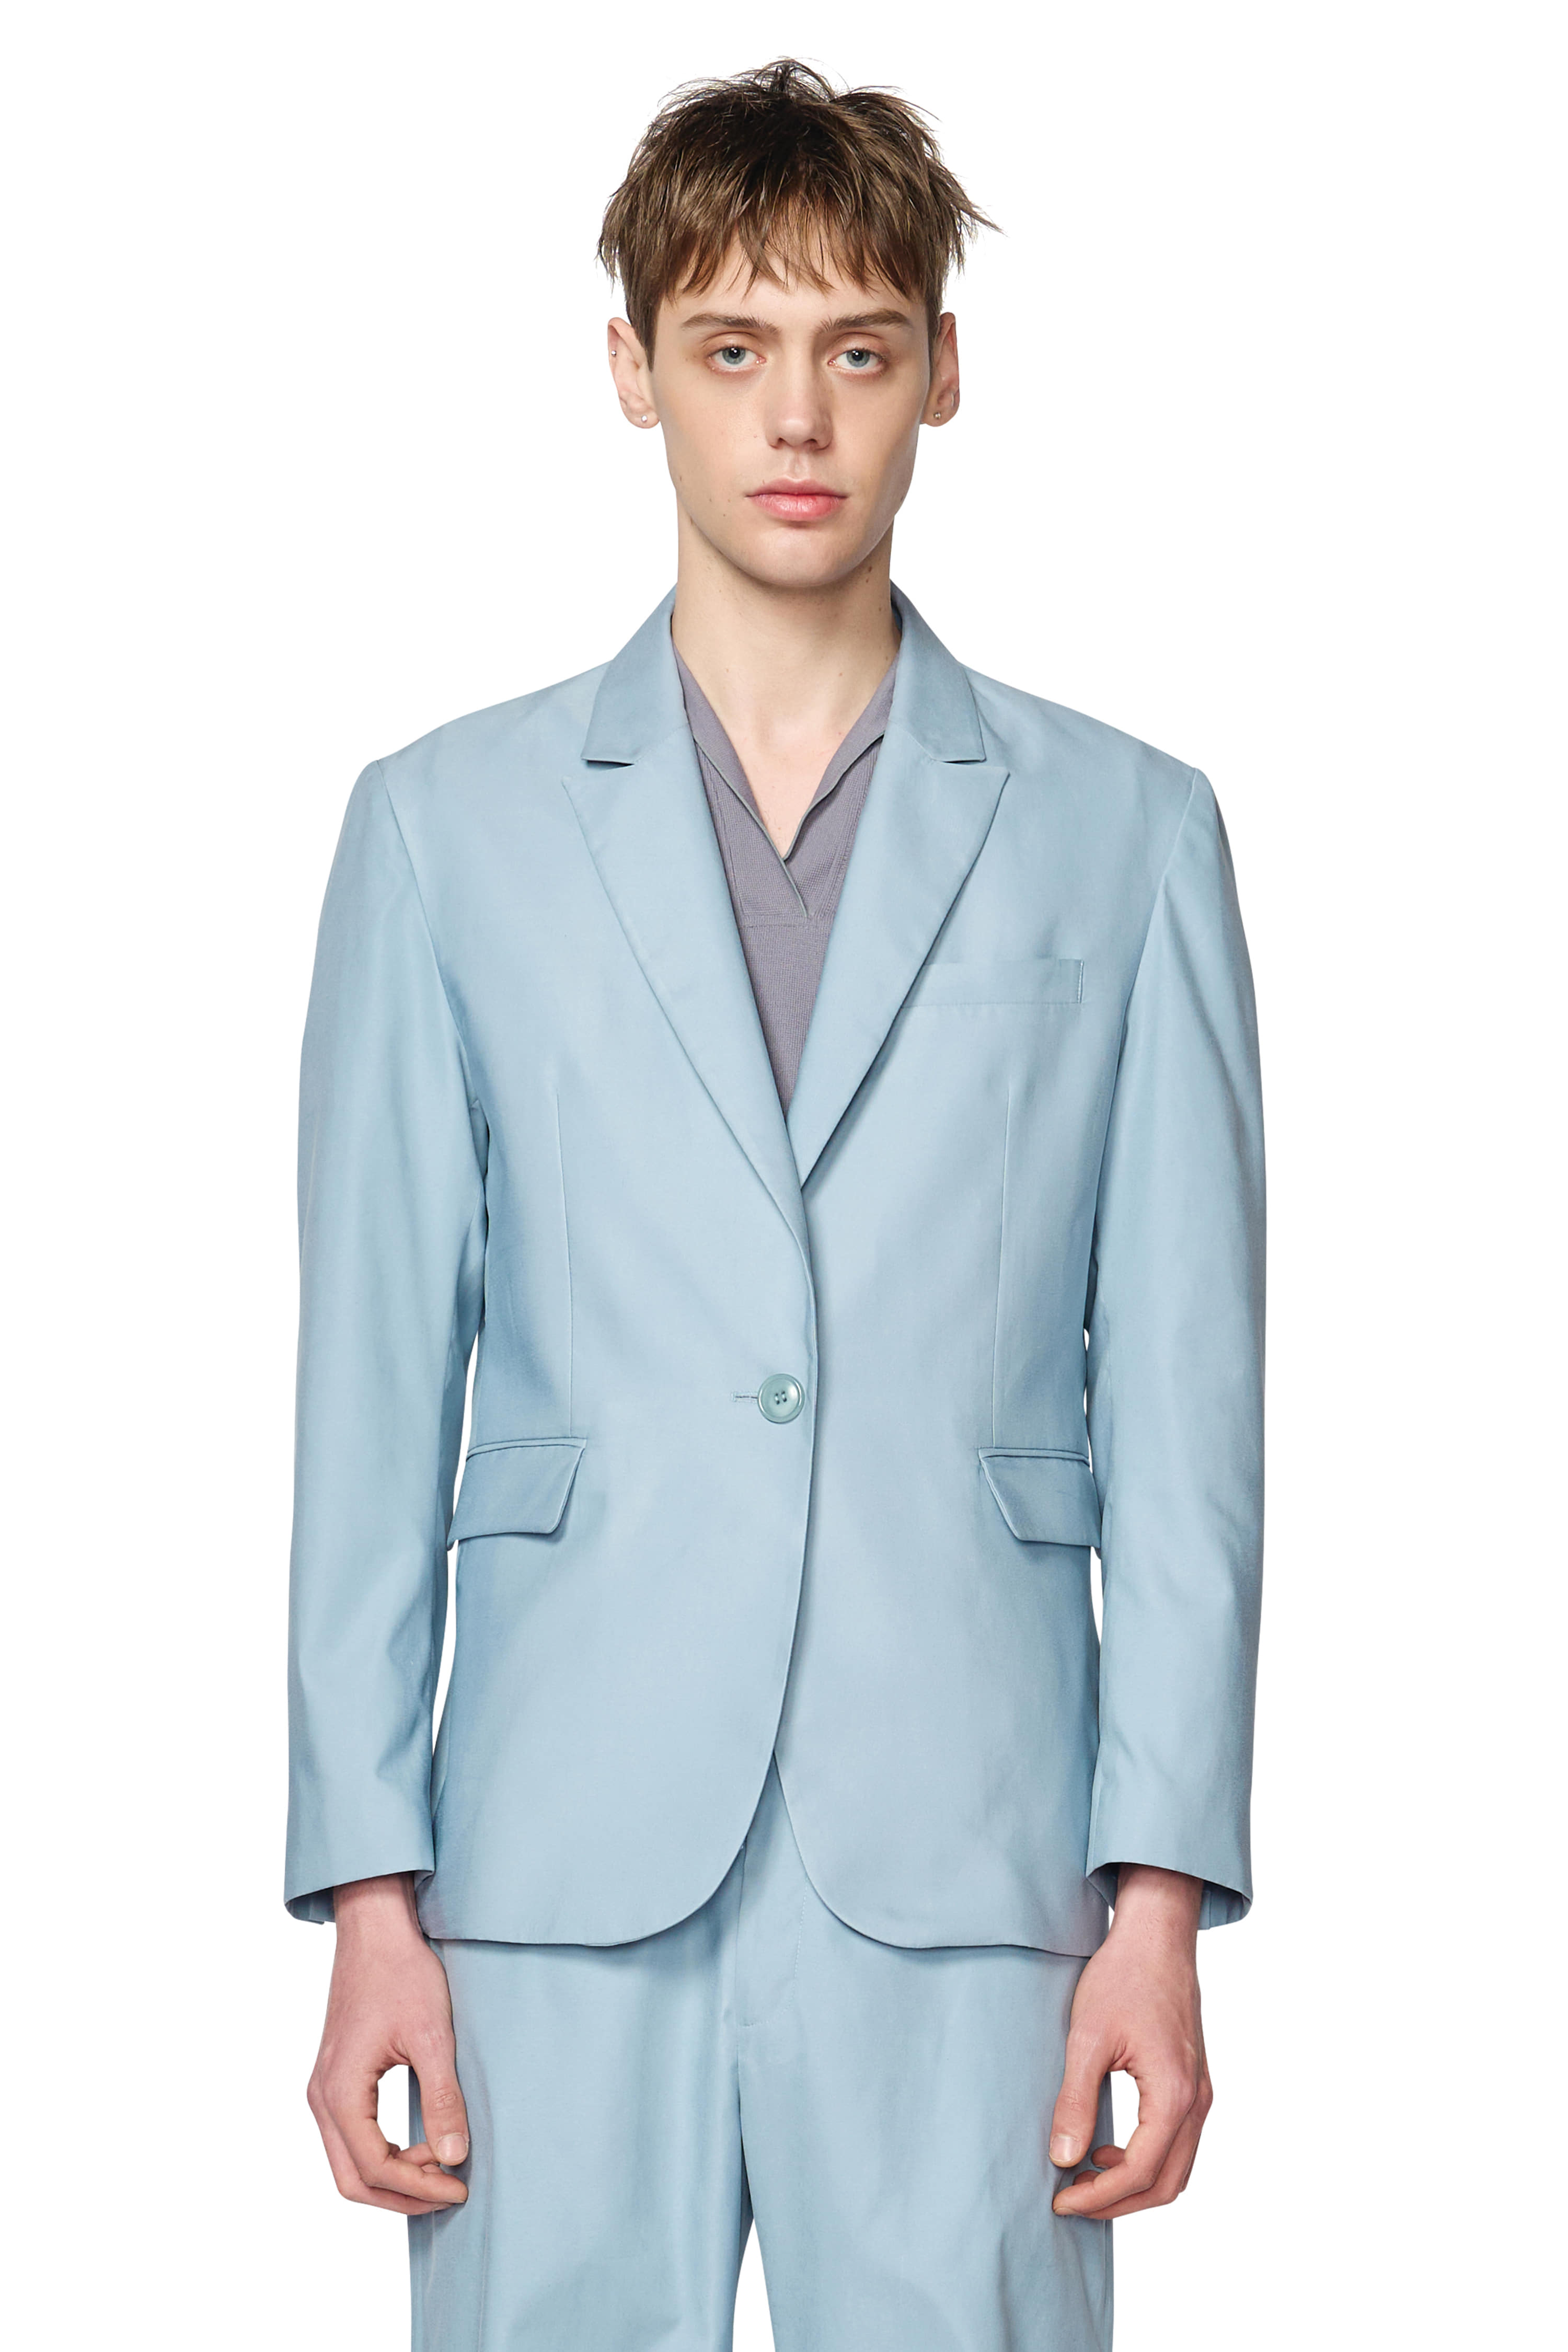 [ Delivery from 5/1 ] LIGHT BLUE SLIM-FIT BLAZER